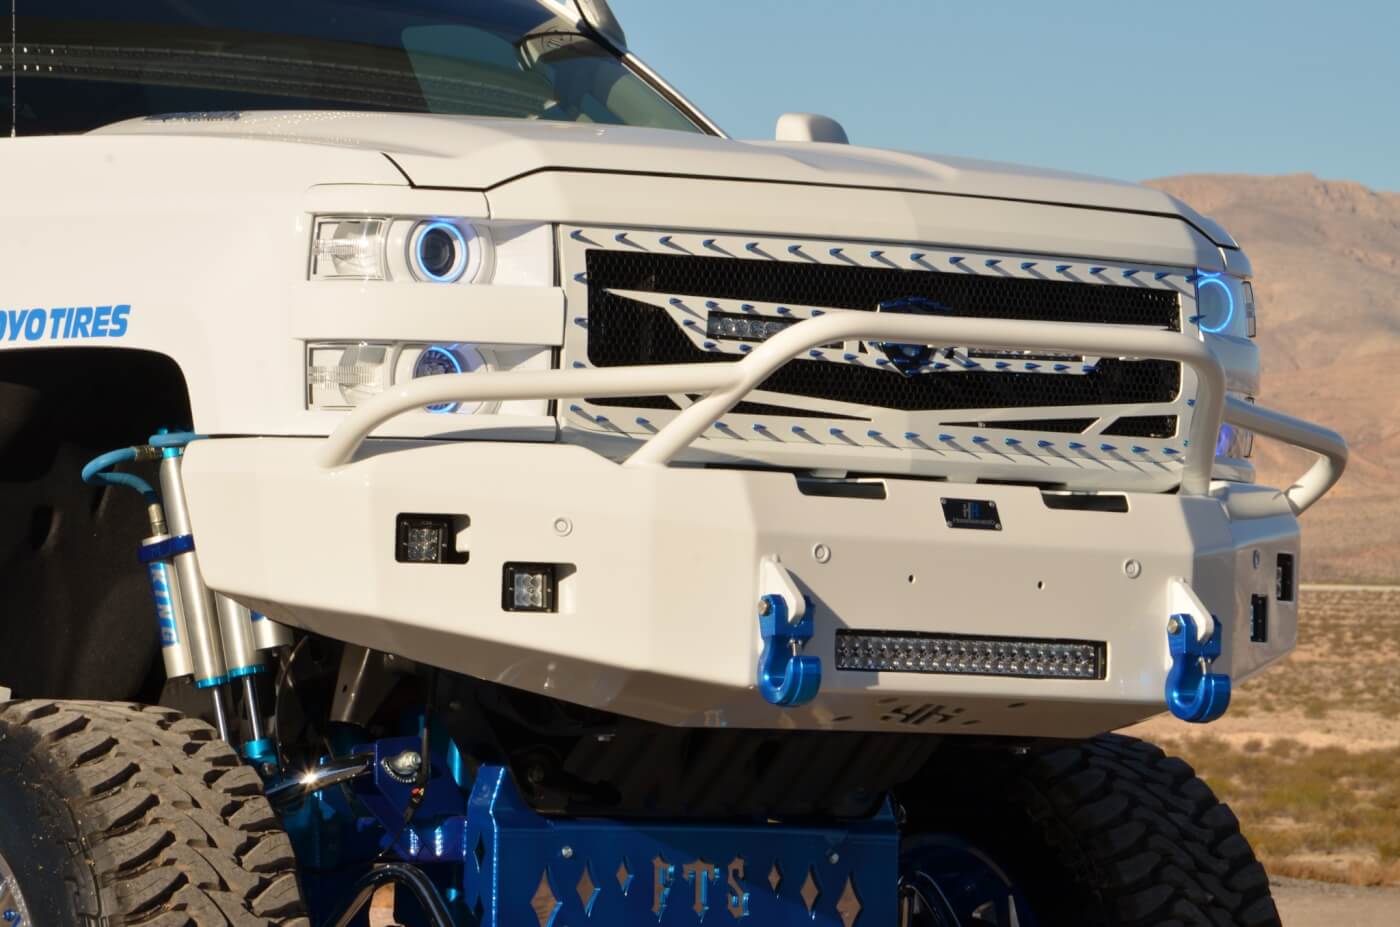 The Hammerhead Armor bumper on the front with the Monster hooks add to the tough look of this rig.